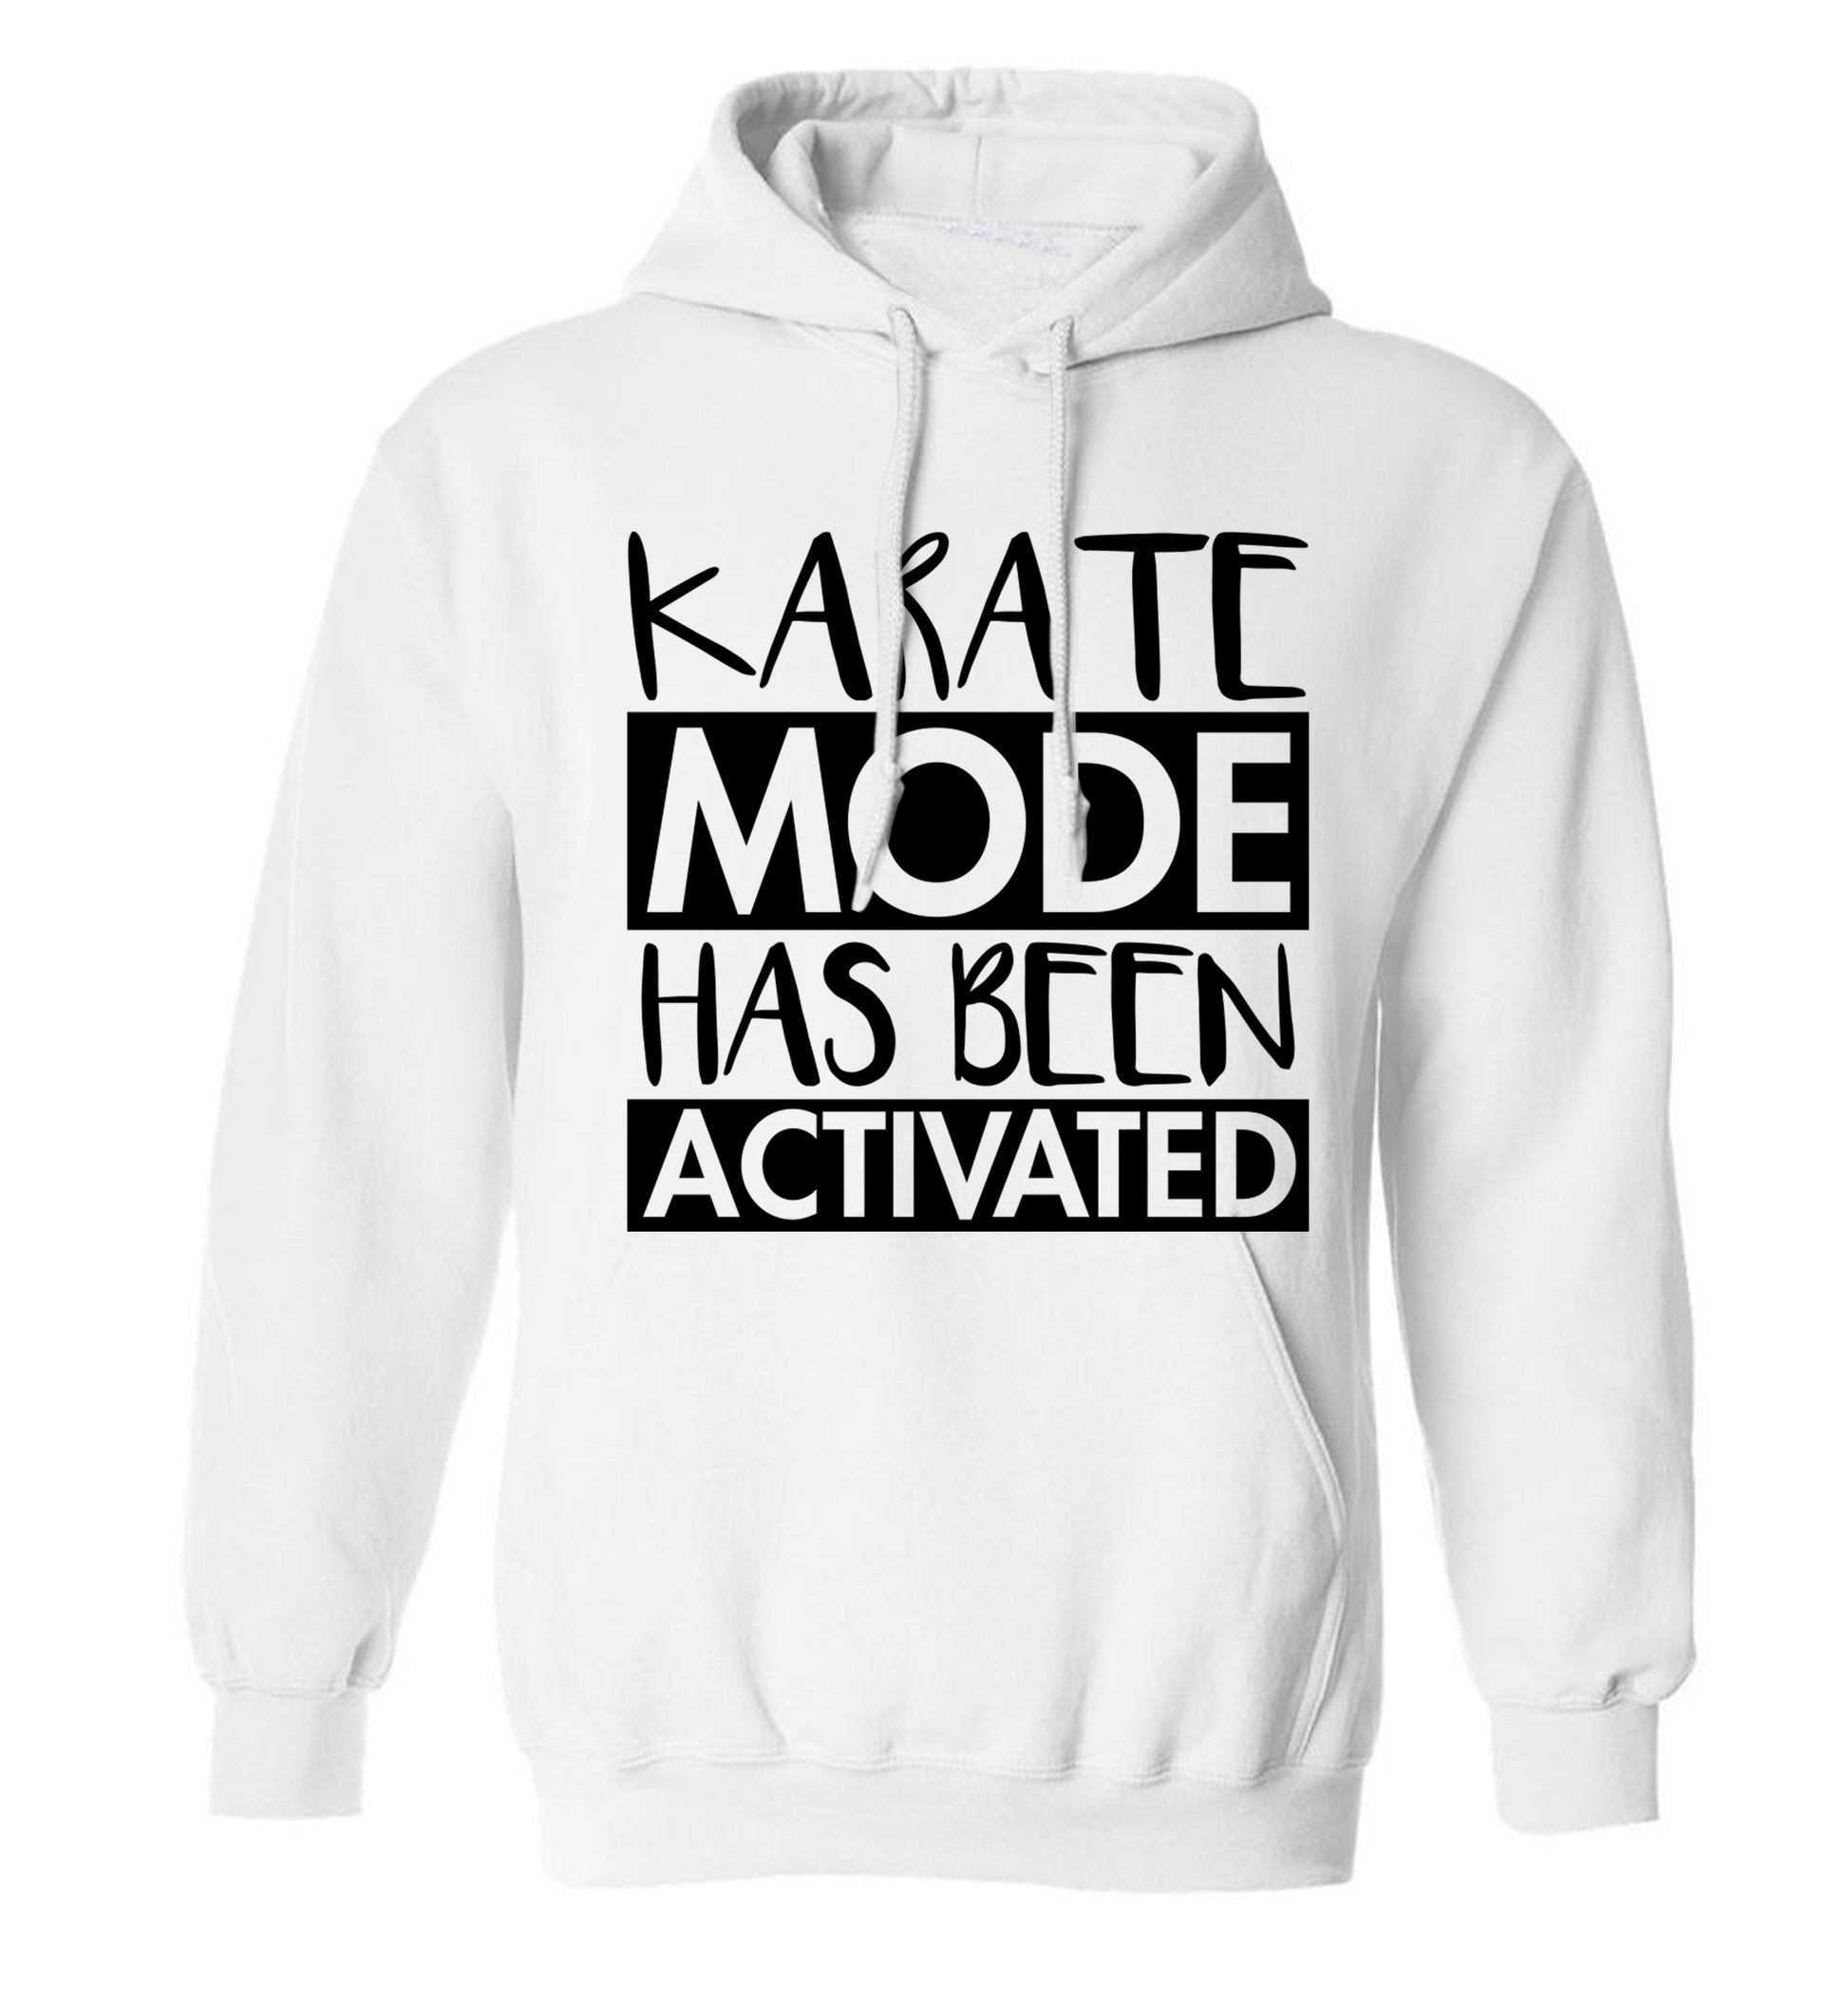 Karate mode activated adults unisex white hoodie 2XL